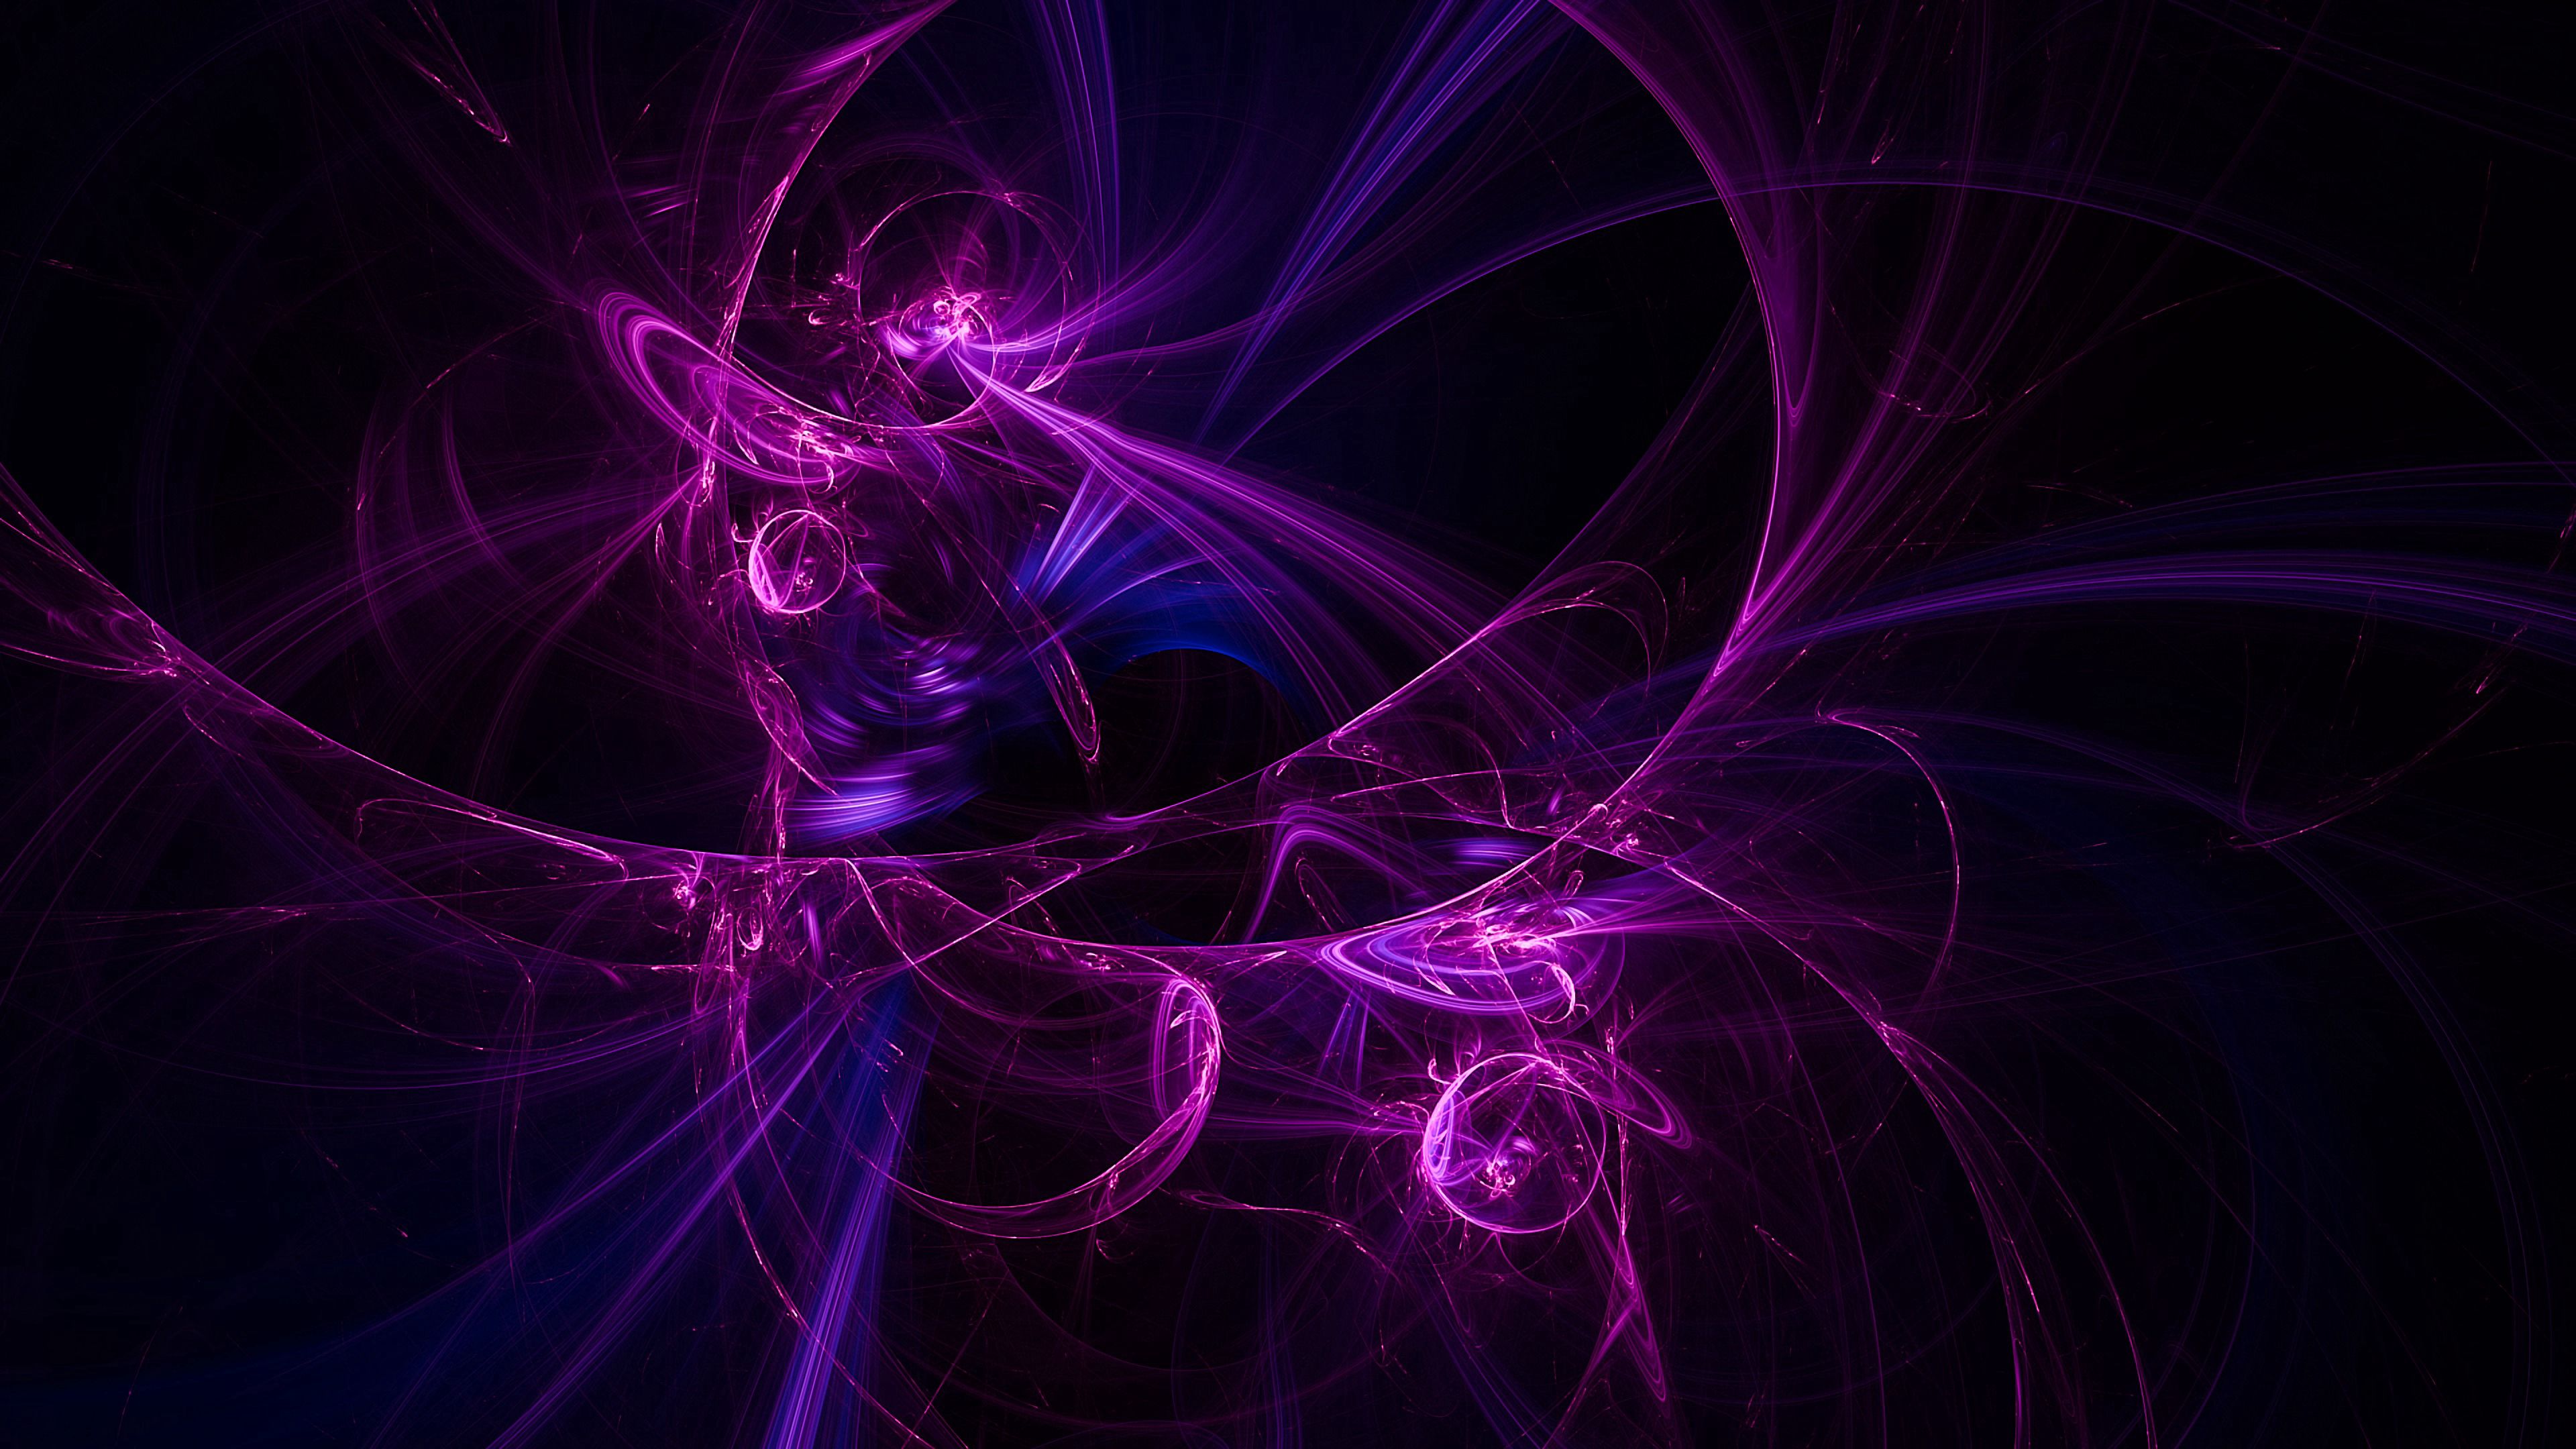 purple, abstract, violet, beams, rays, fractal, radiation